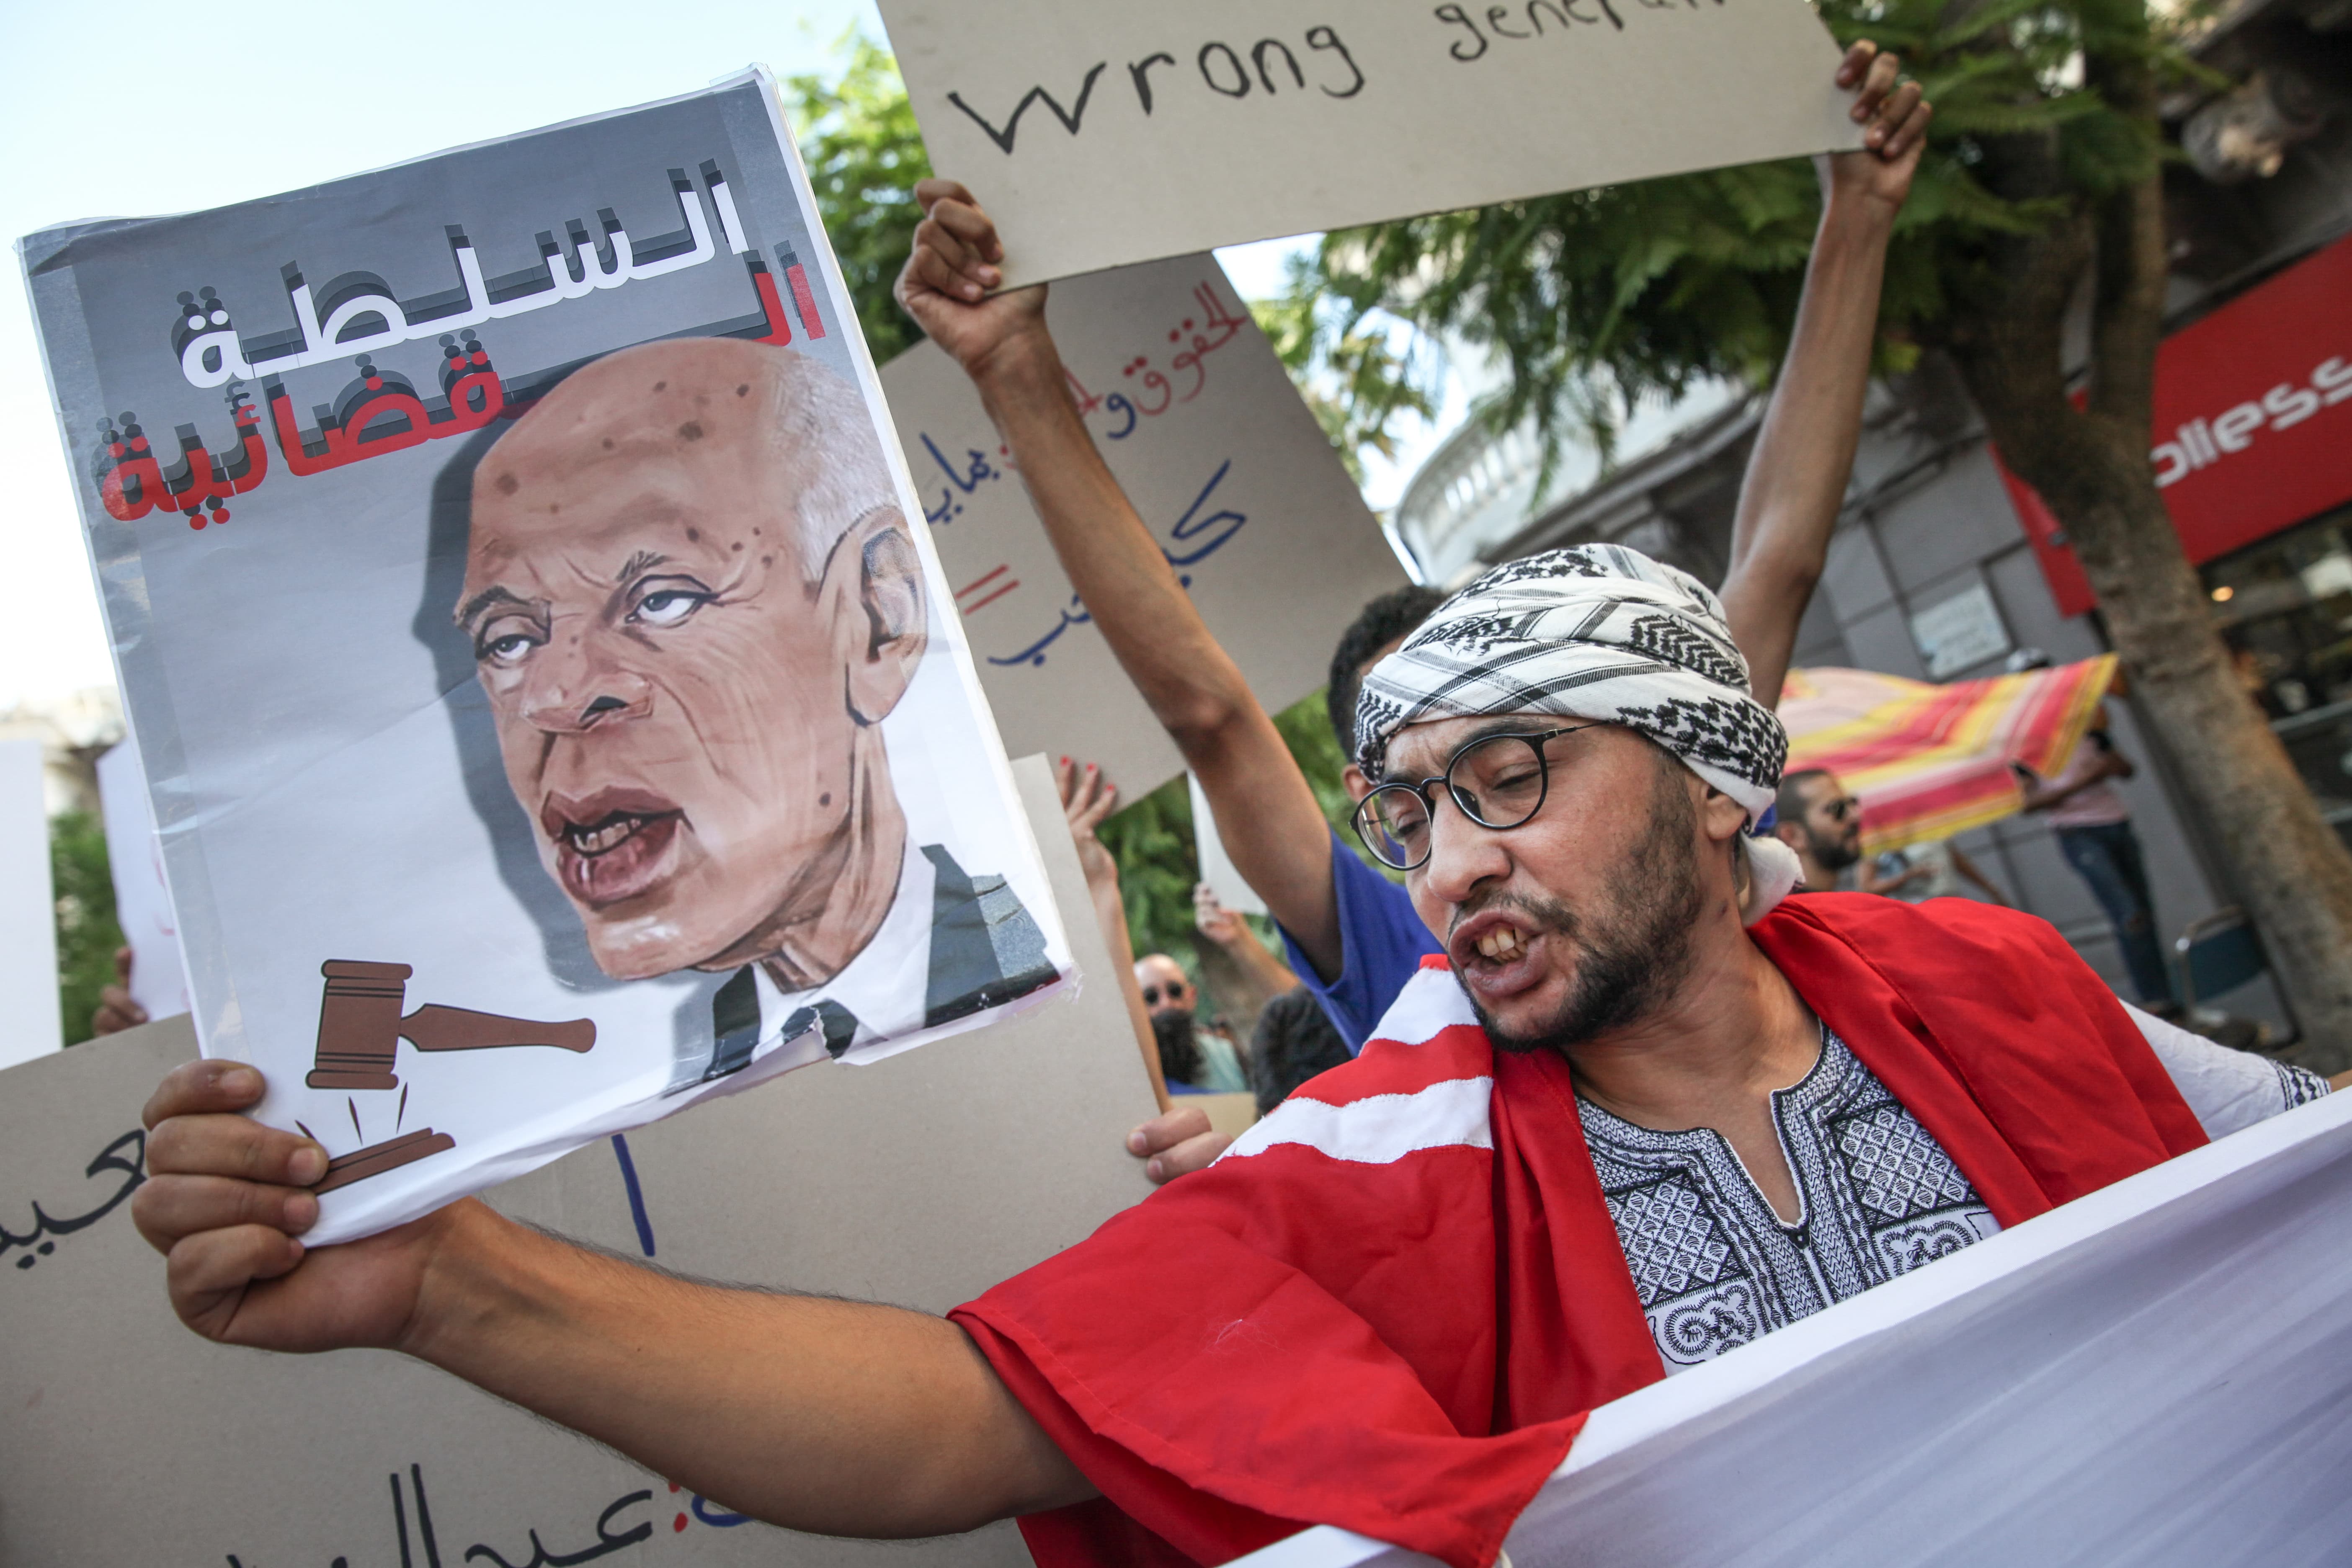 A Tunisian protester shouts slogans at an anti-protest in the capital Tunis, Tunisia, on 22 July 2022. (Reuters)